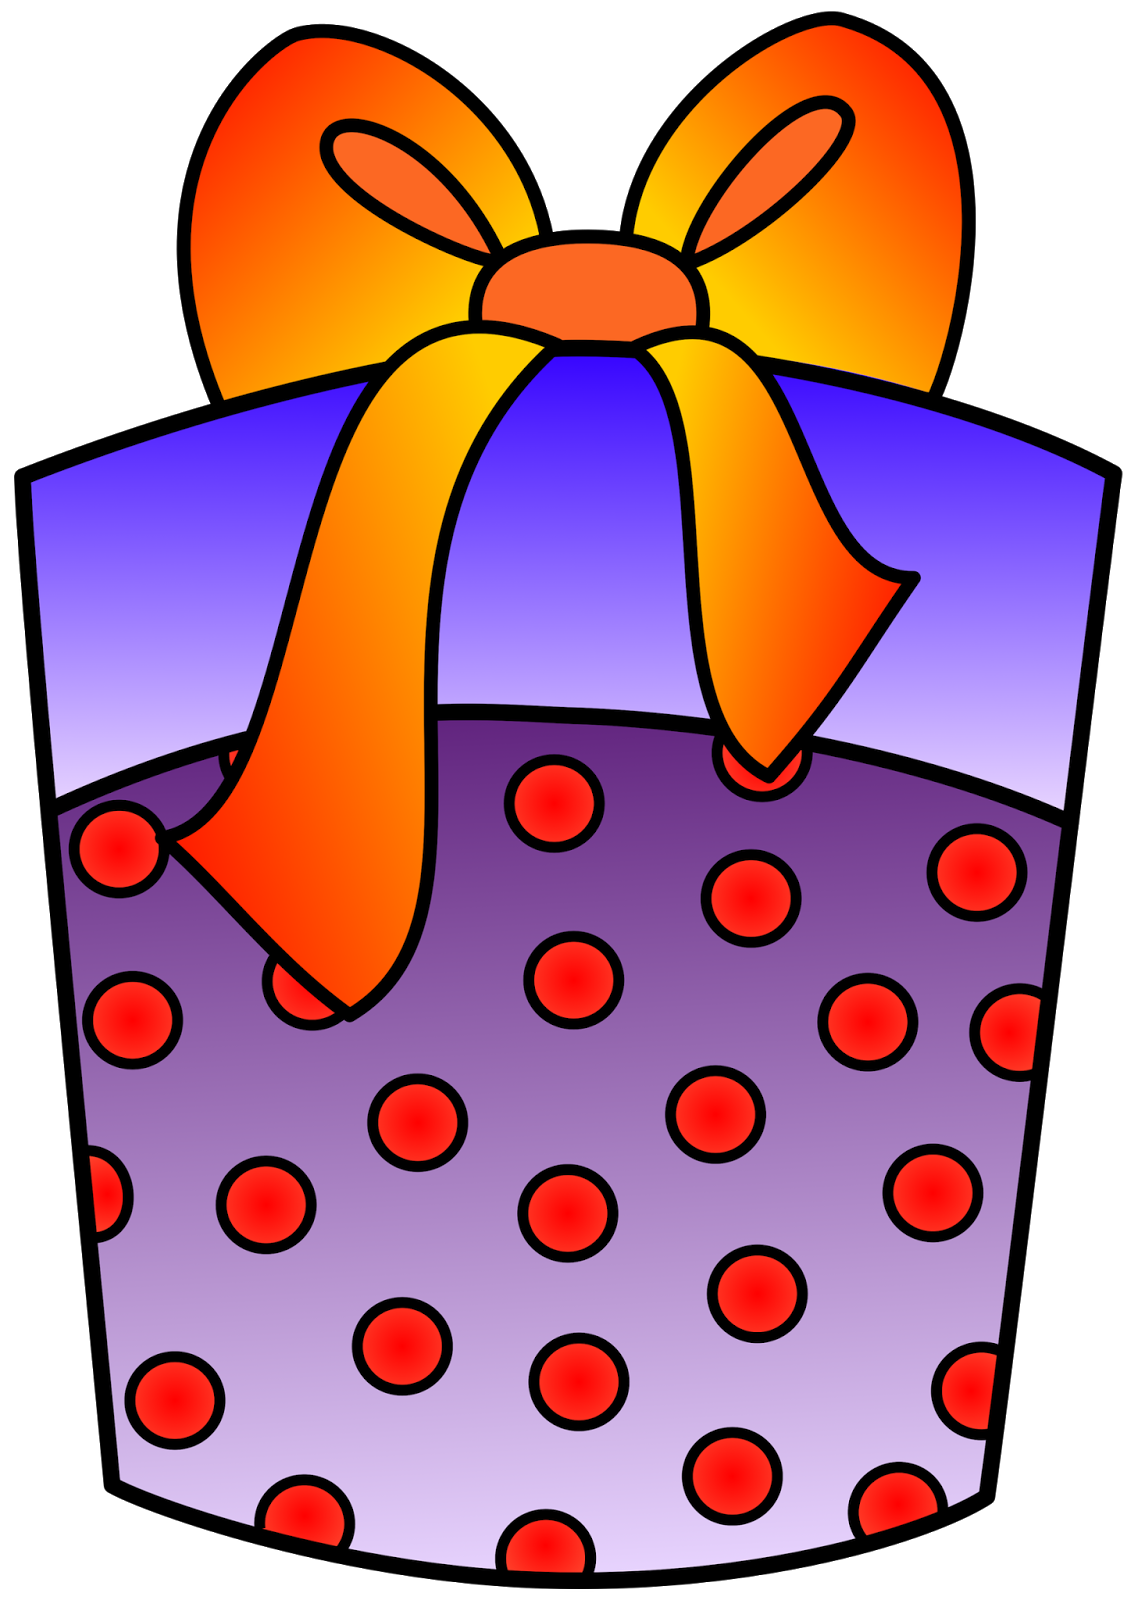 Images For > Pile Of Birthday Presents Clipart